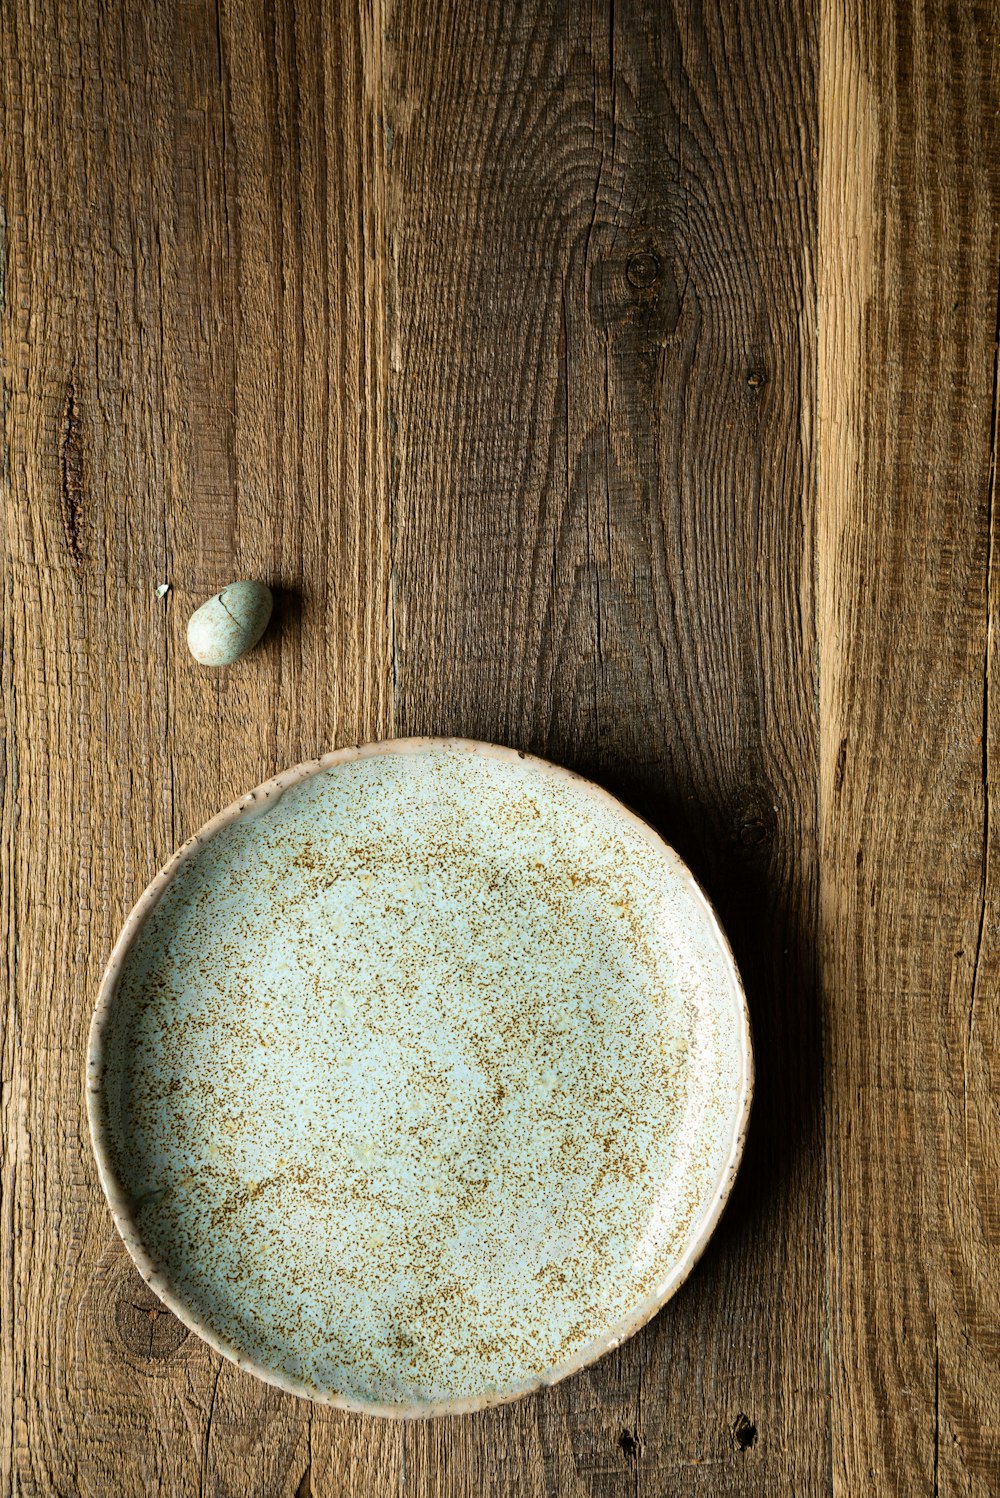 a plate and a spoon on a wooden table